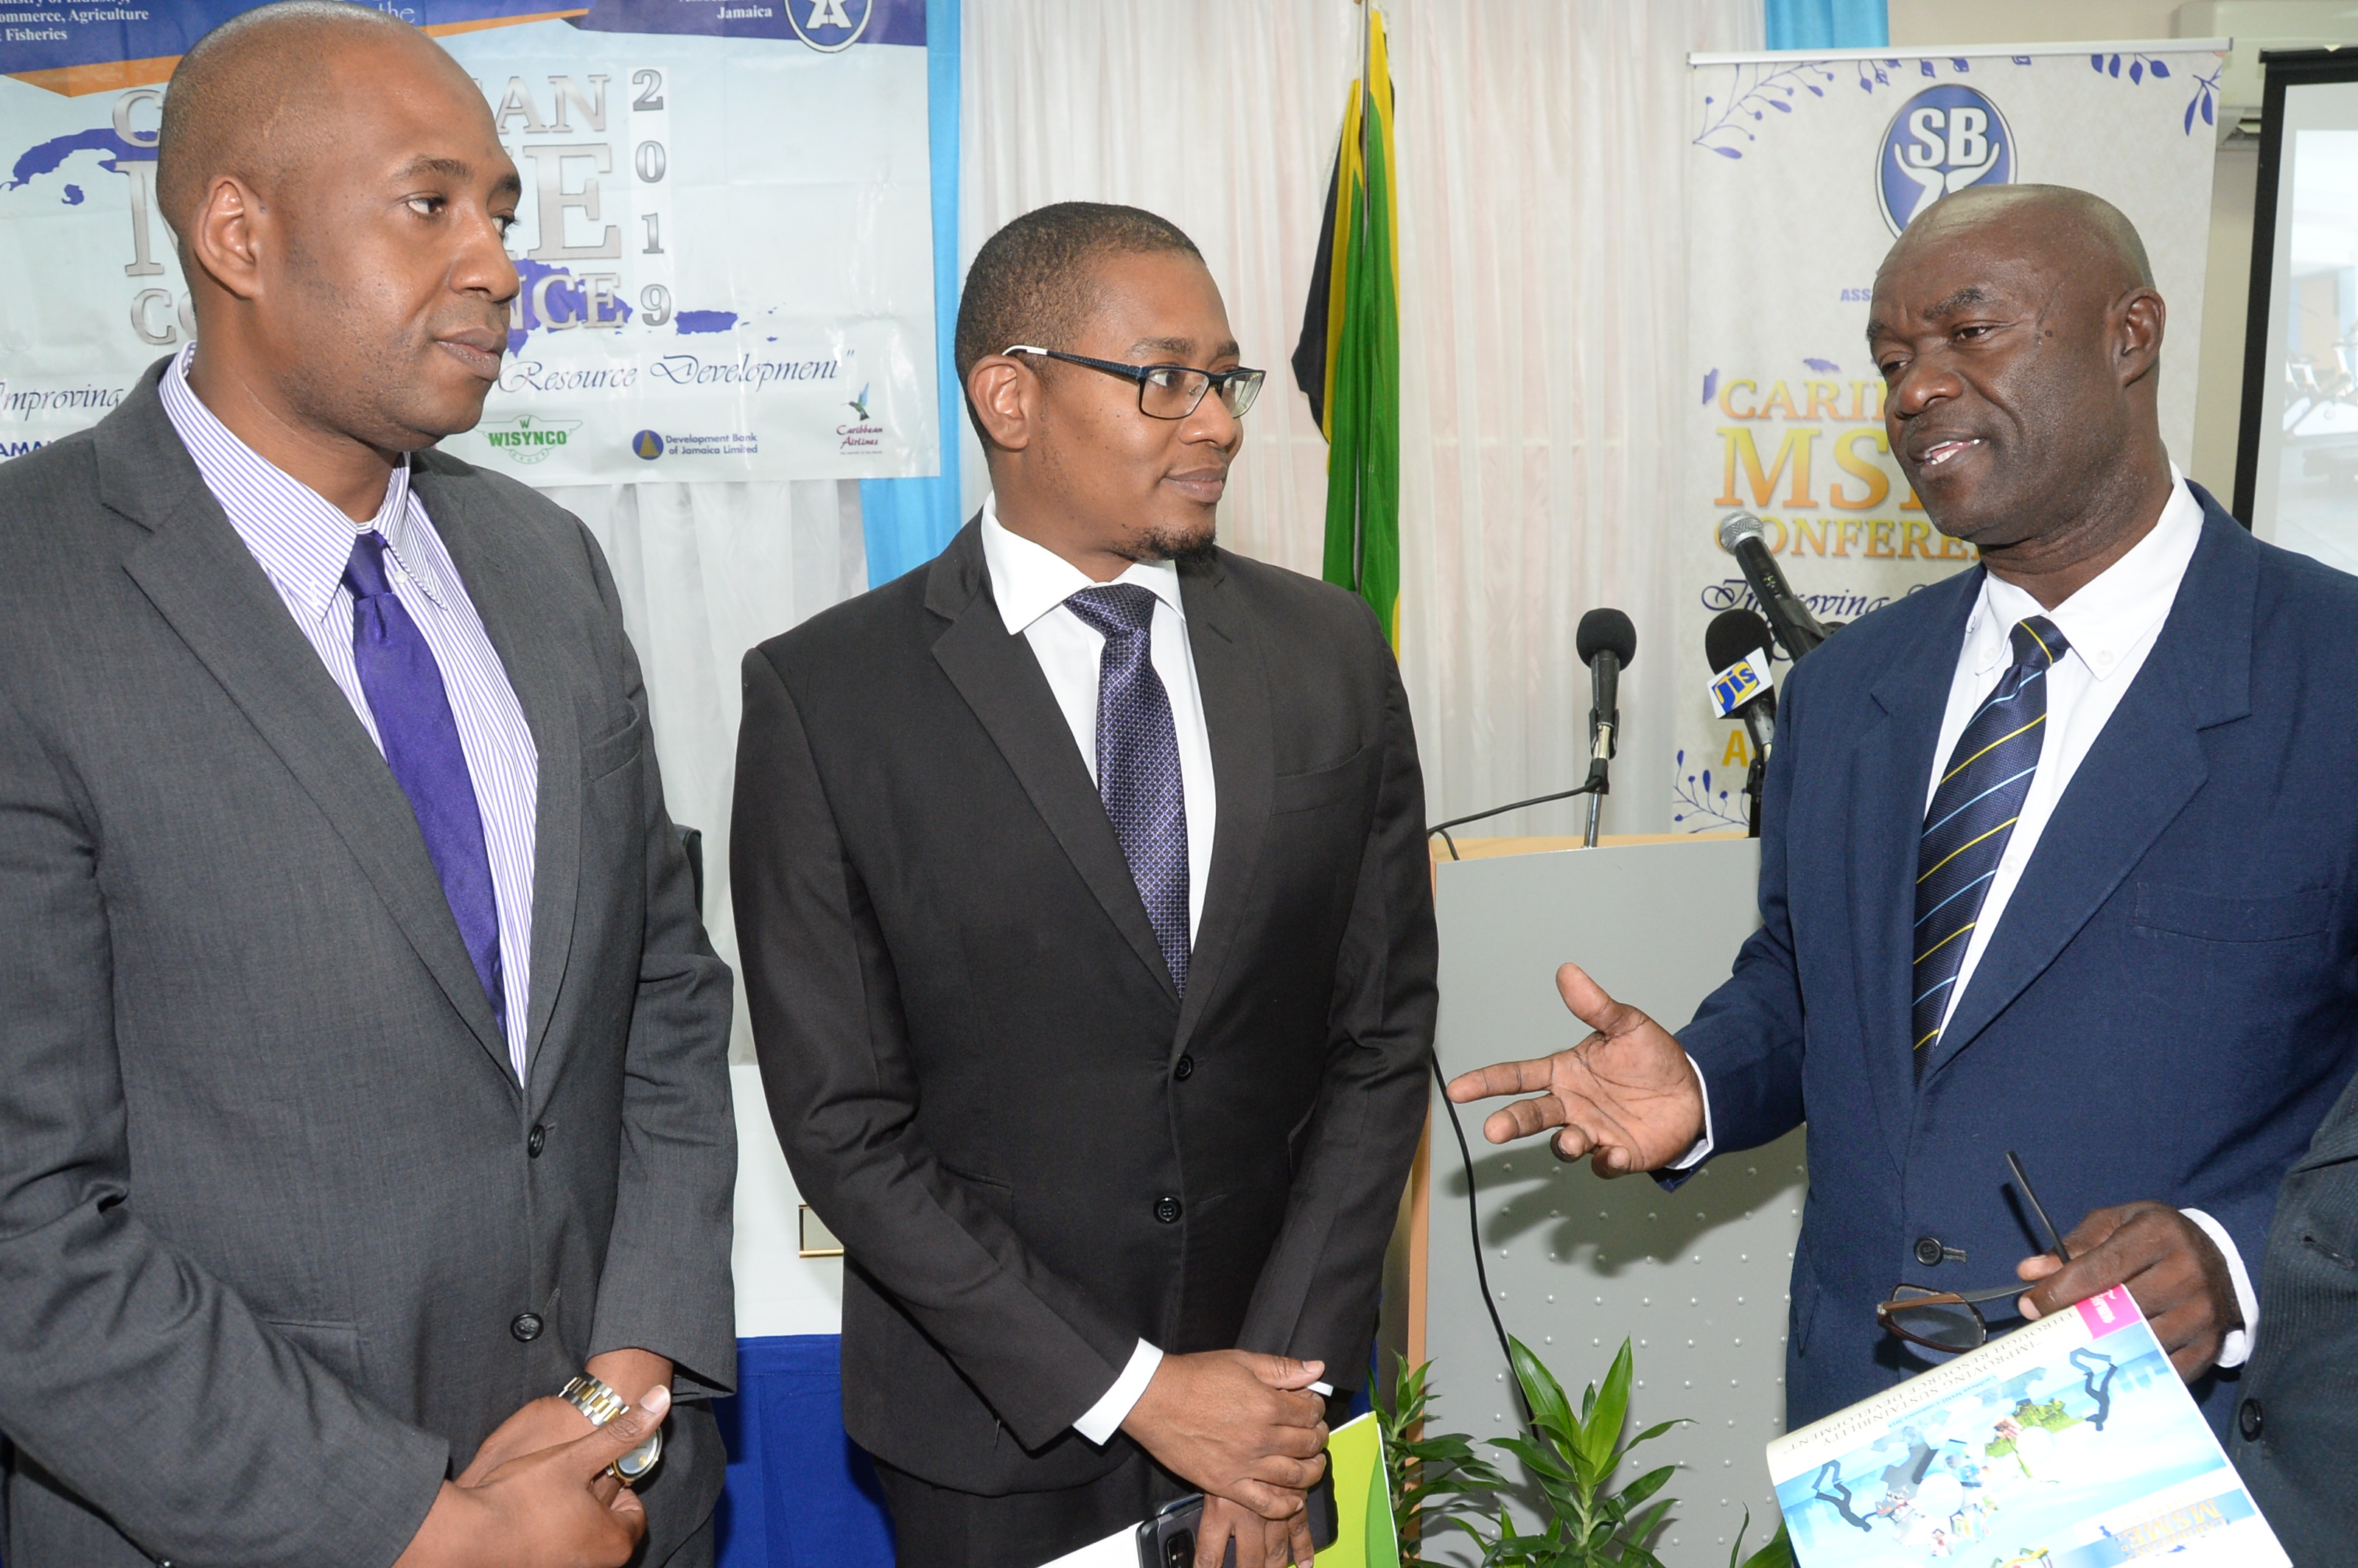 Hugh Johnson (right), president of the Small Business Association of Jamaica, makes a point to Ryan Parkes, chief of business banking at JN Bank and Floyd Green, minister of state in the Ministry of Industry, Commerce, Agriculture and Fisheries during the launch of the MSME Conference 2019 last Wednesday at the ministry’s office in New Kingston.